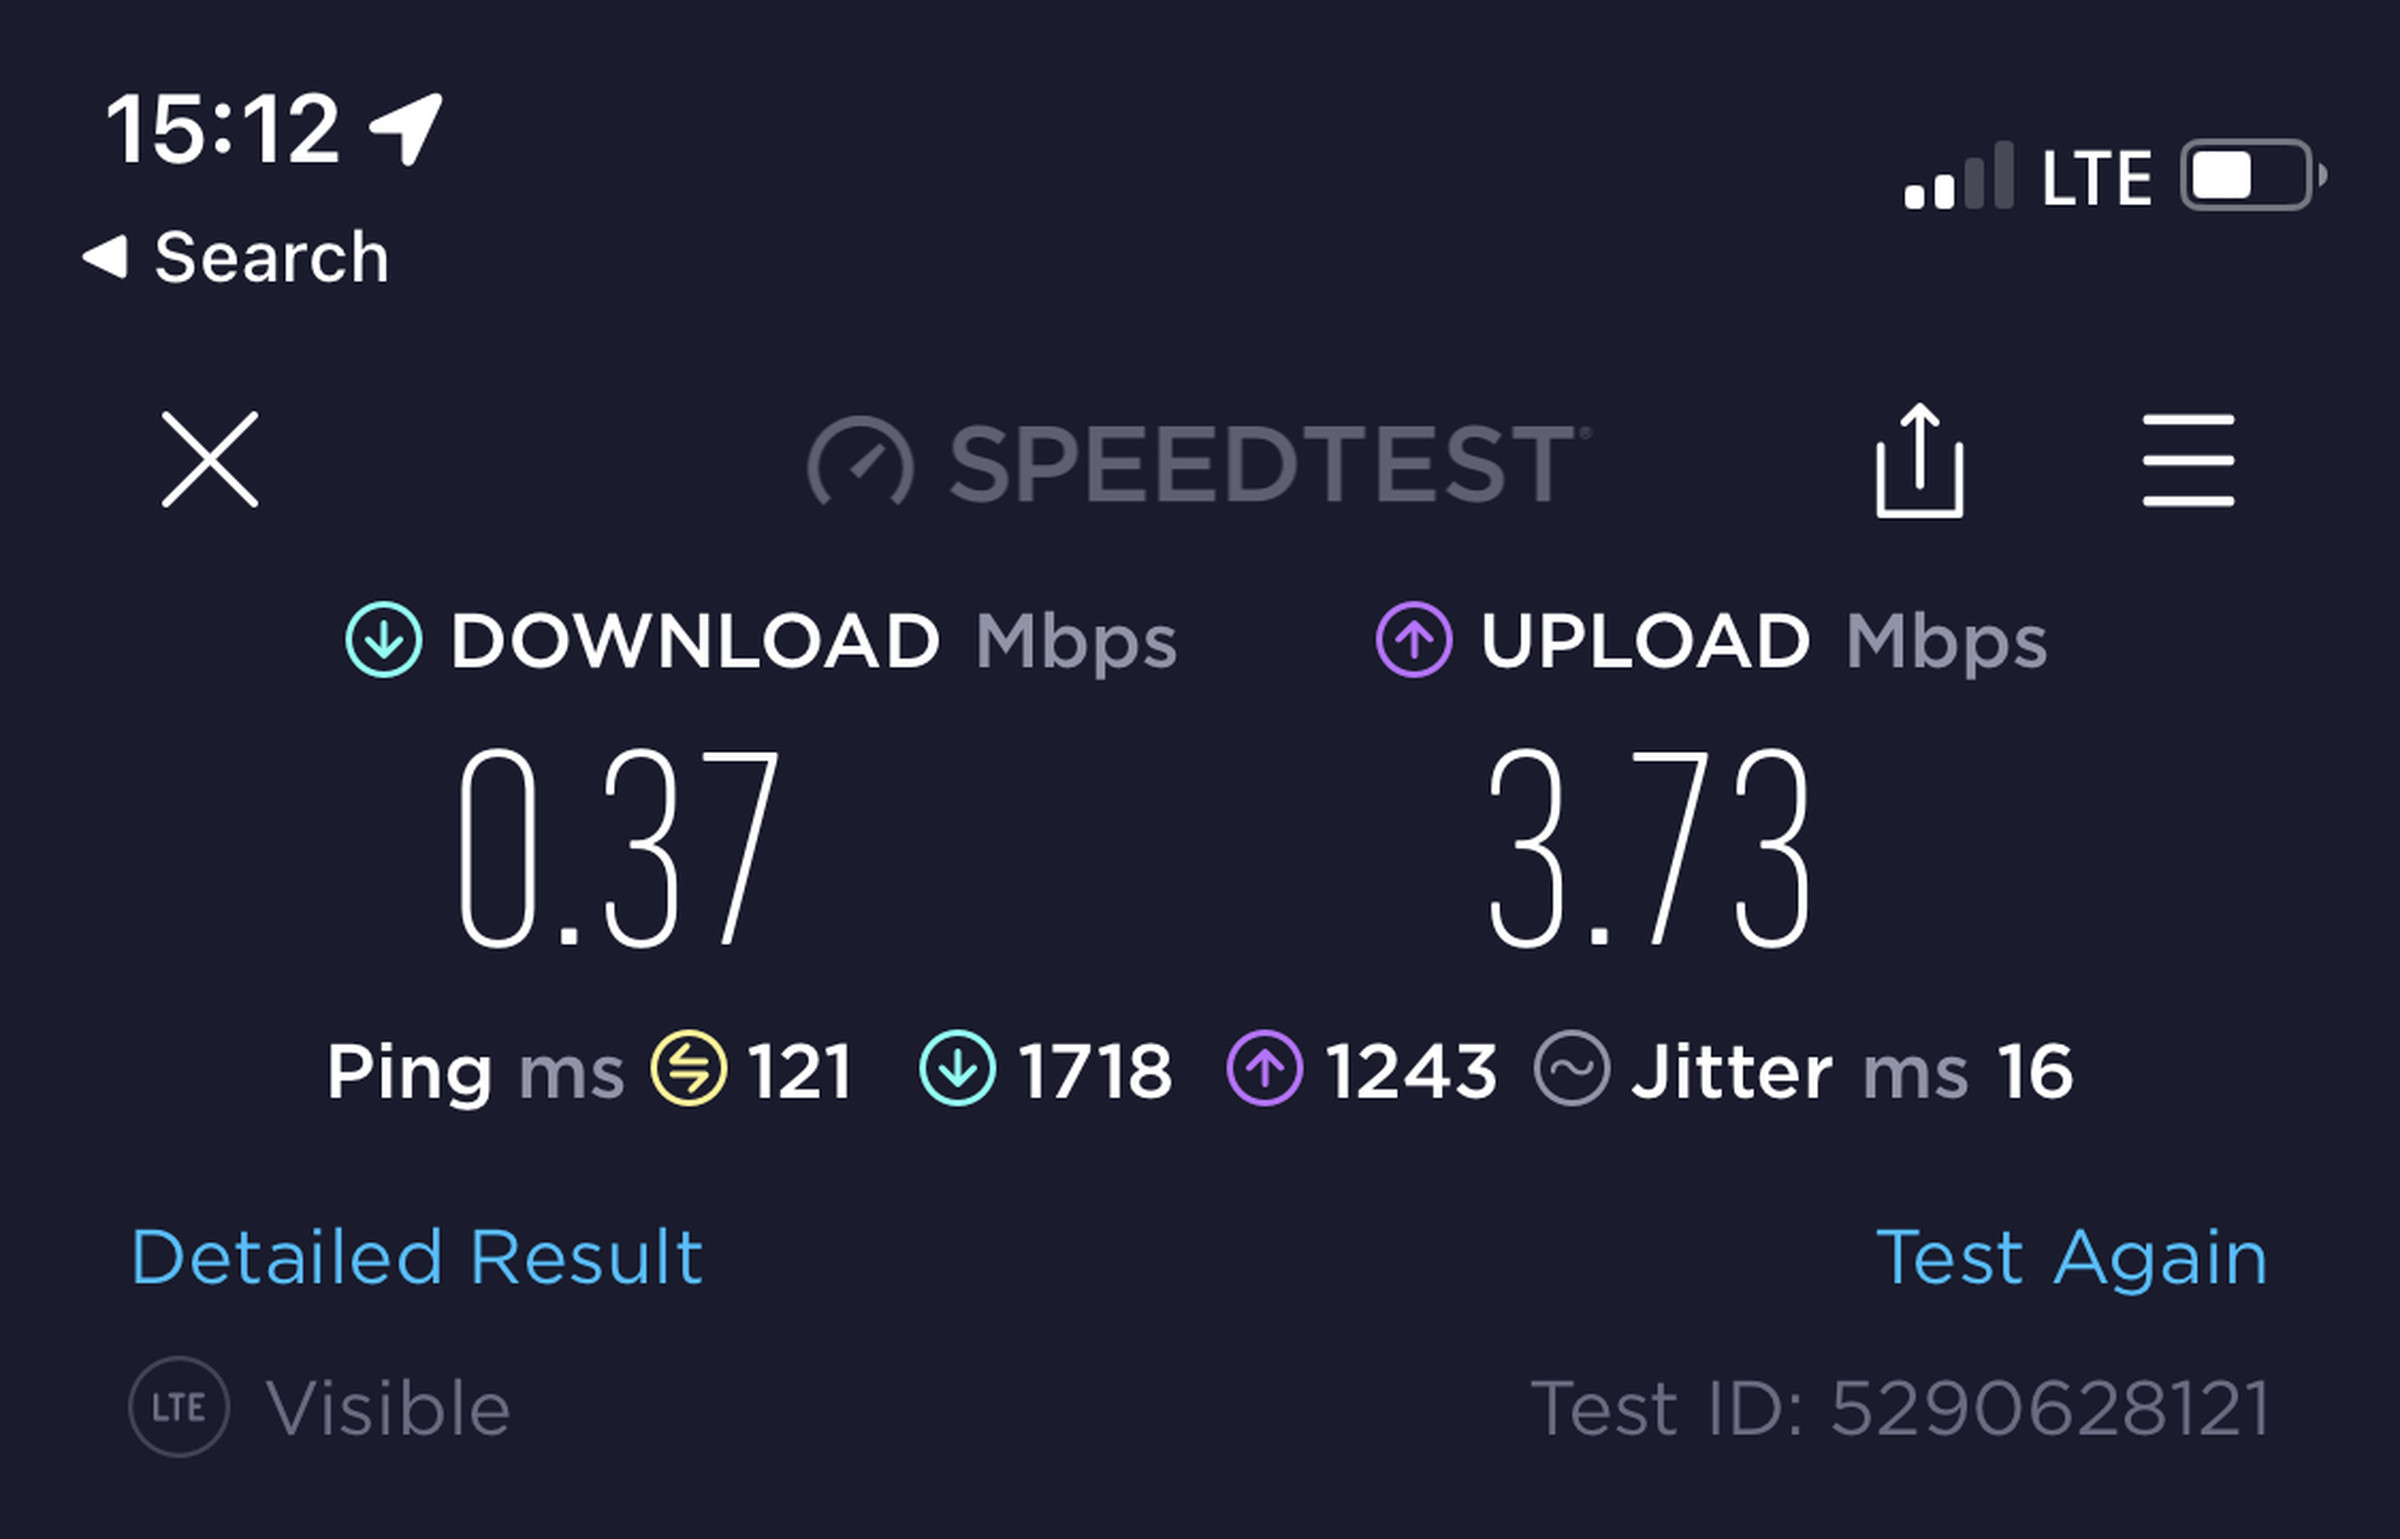 Screenshot of a speed test for Verizon’s Visible, showing a download speed of 0.37 Mbps, and an upload speed of 3.73 Mbps, and a ping of 121 milliseconds.